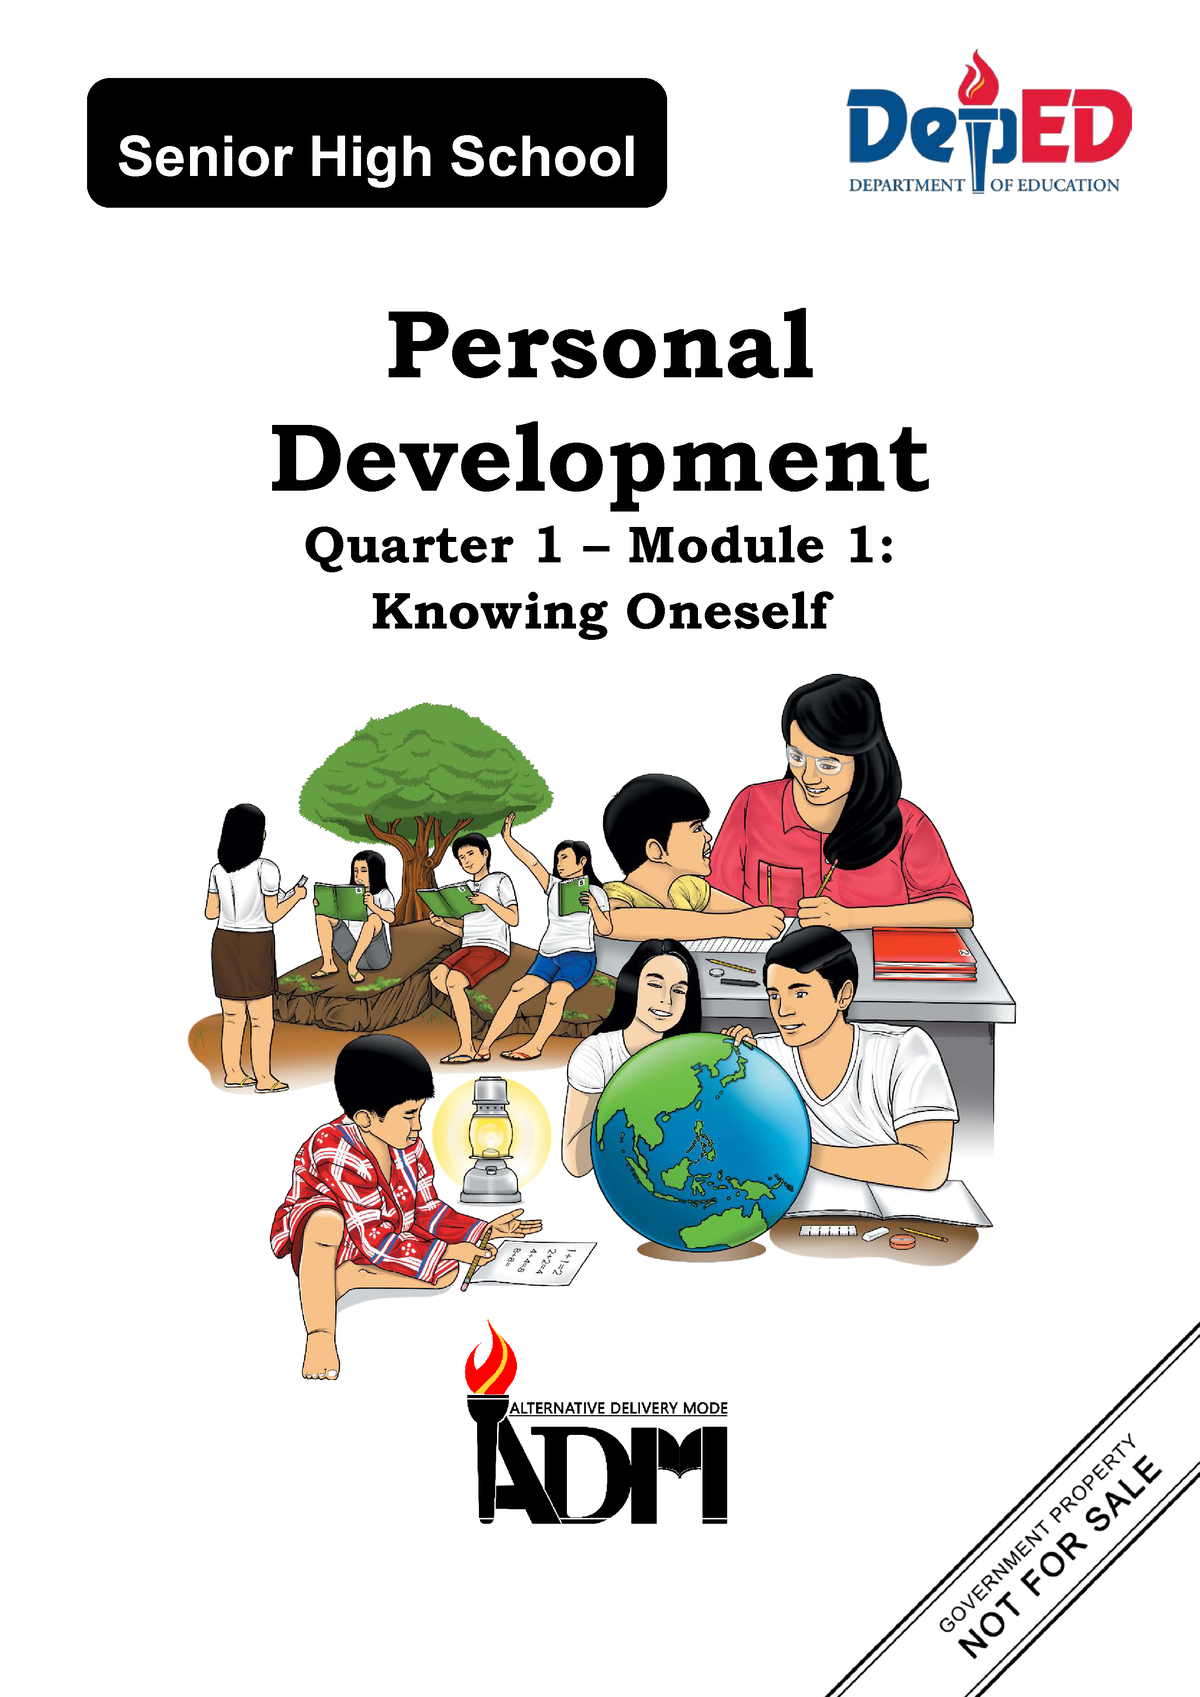 Perdev Q1 Mod1 Knowing Oneself 1 Personal Development Quarter 1 Module 1 Knowing Oneself 7092